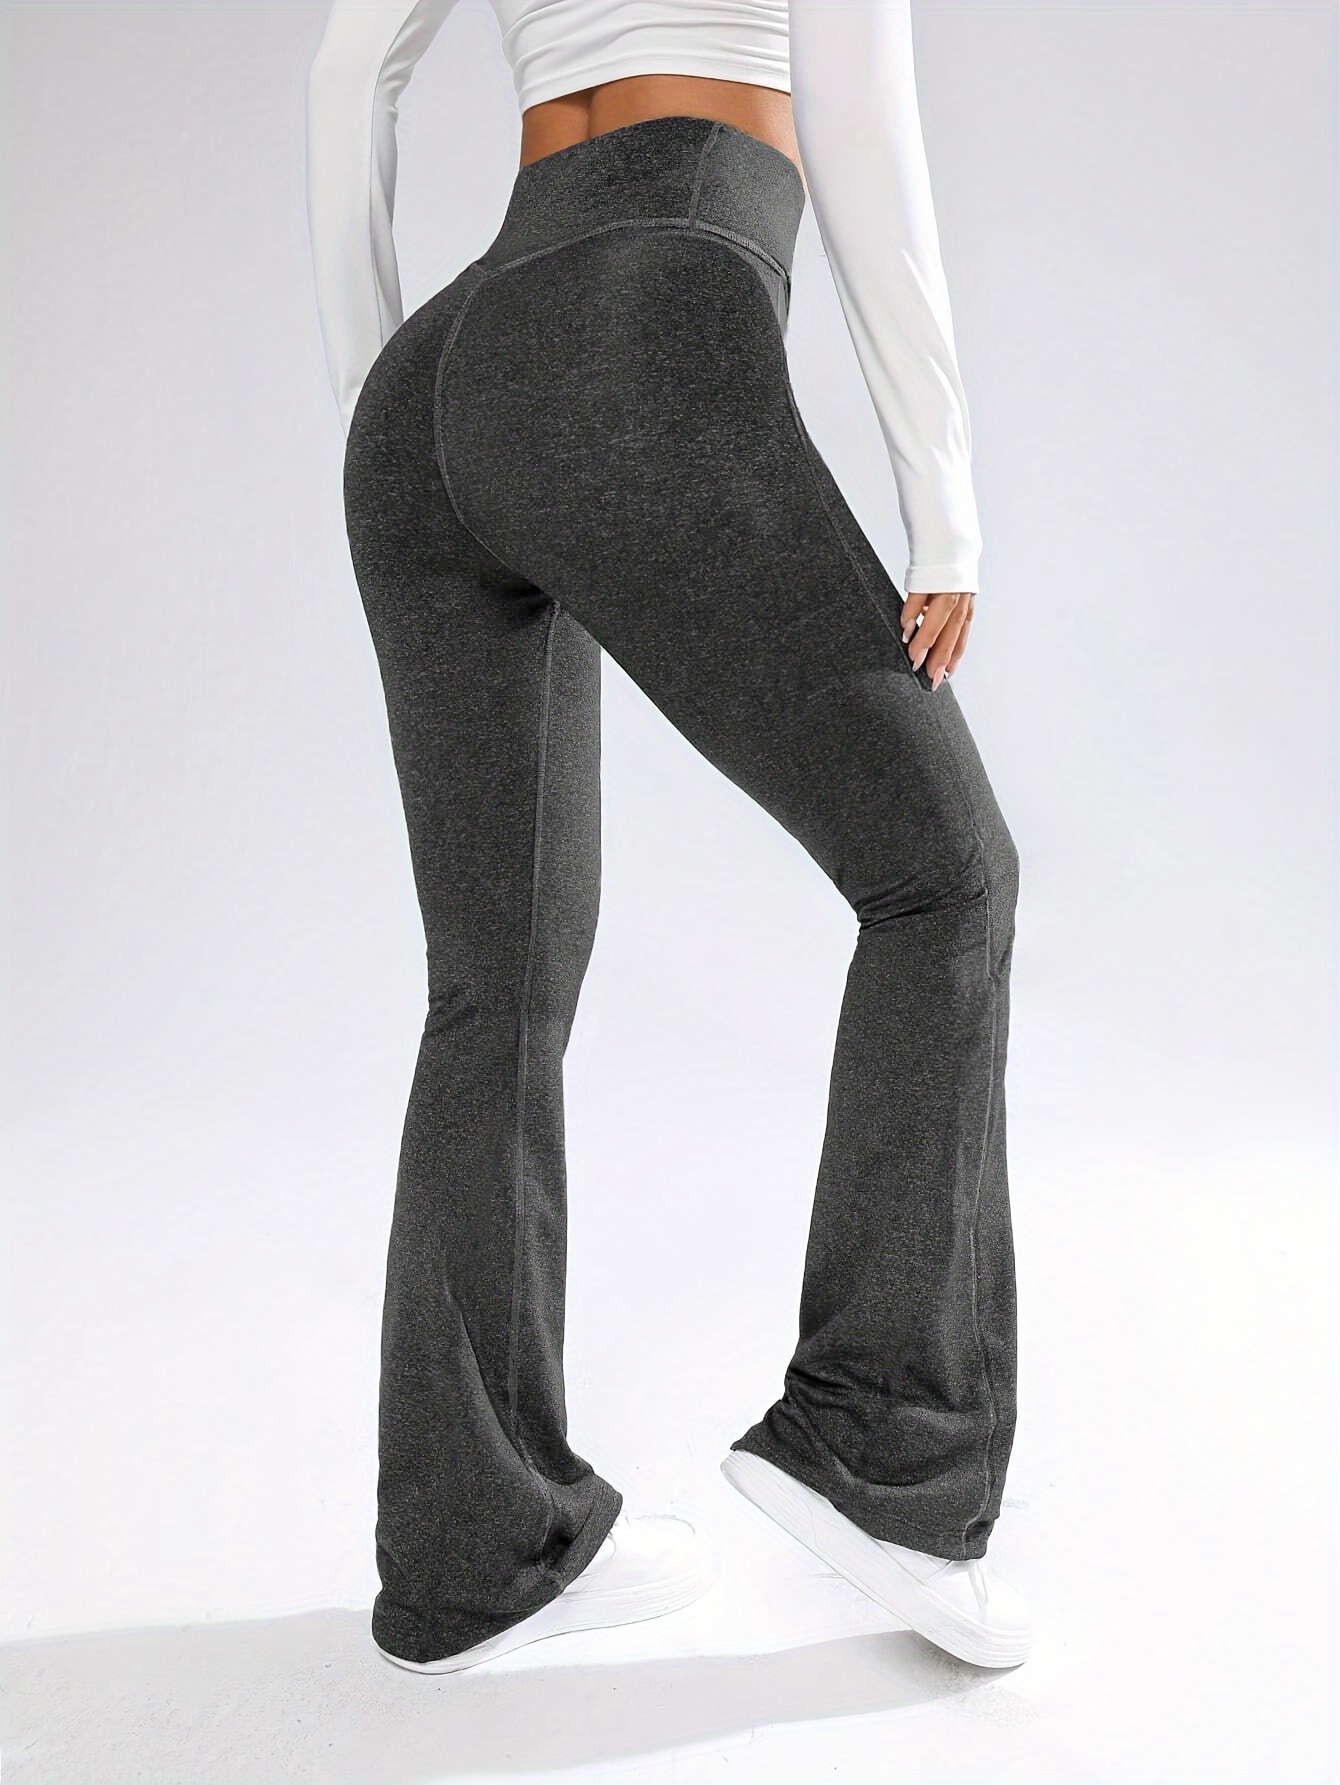 Women's Flared Leg Stretch Yoga Pants Bell Bottoms Mid Rise Lounge